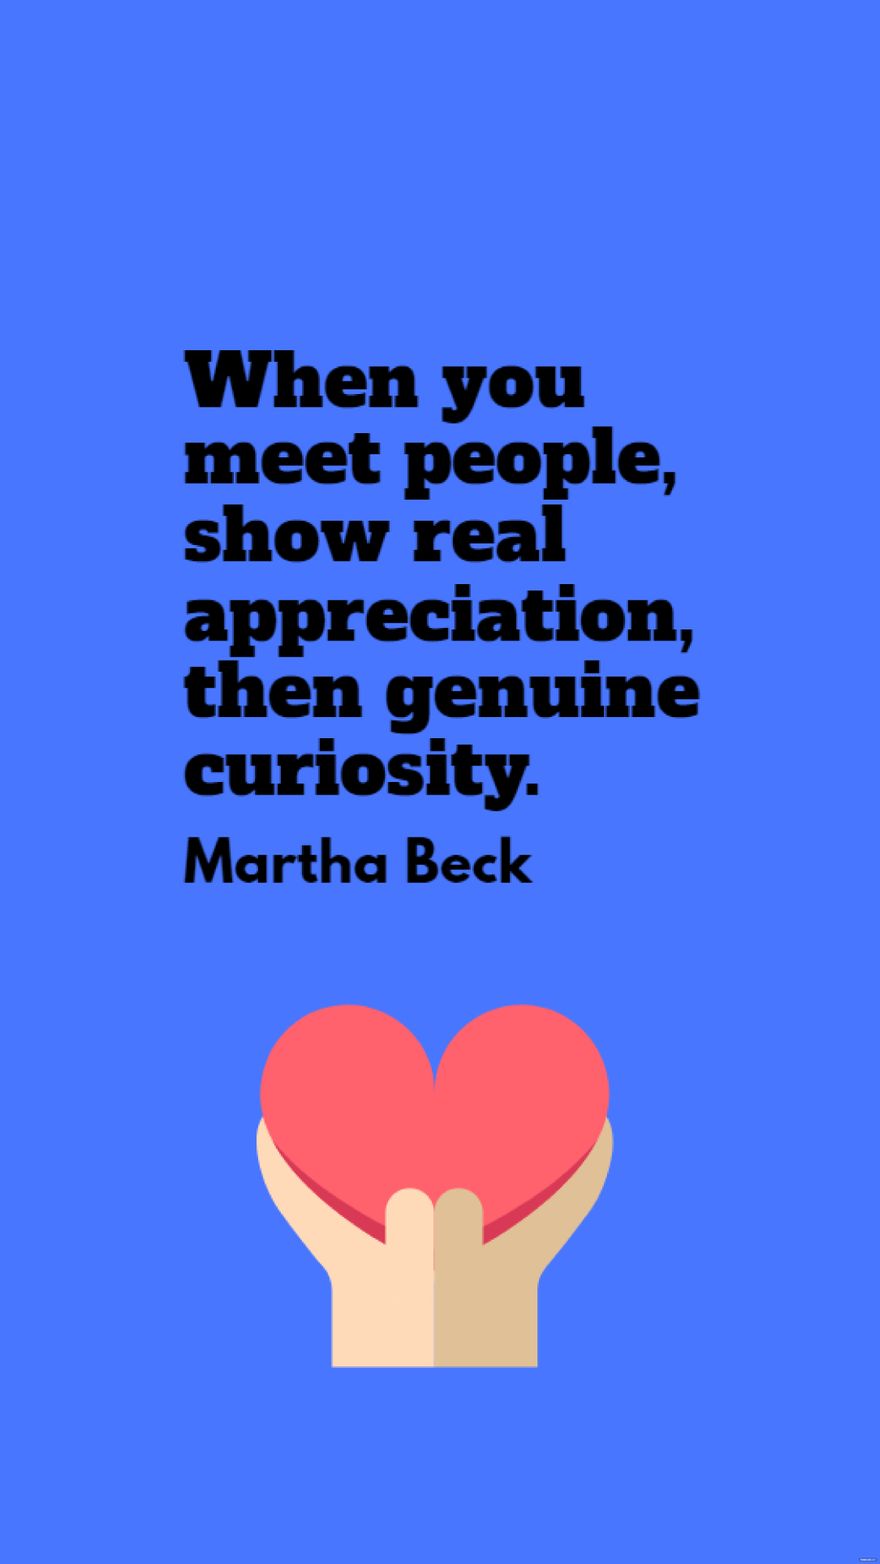 Martha Beck - When you meet people, show real appreciation, then genuine curiosity.